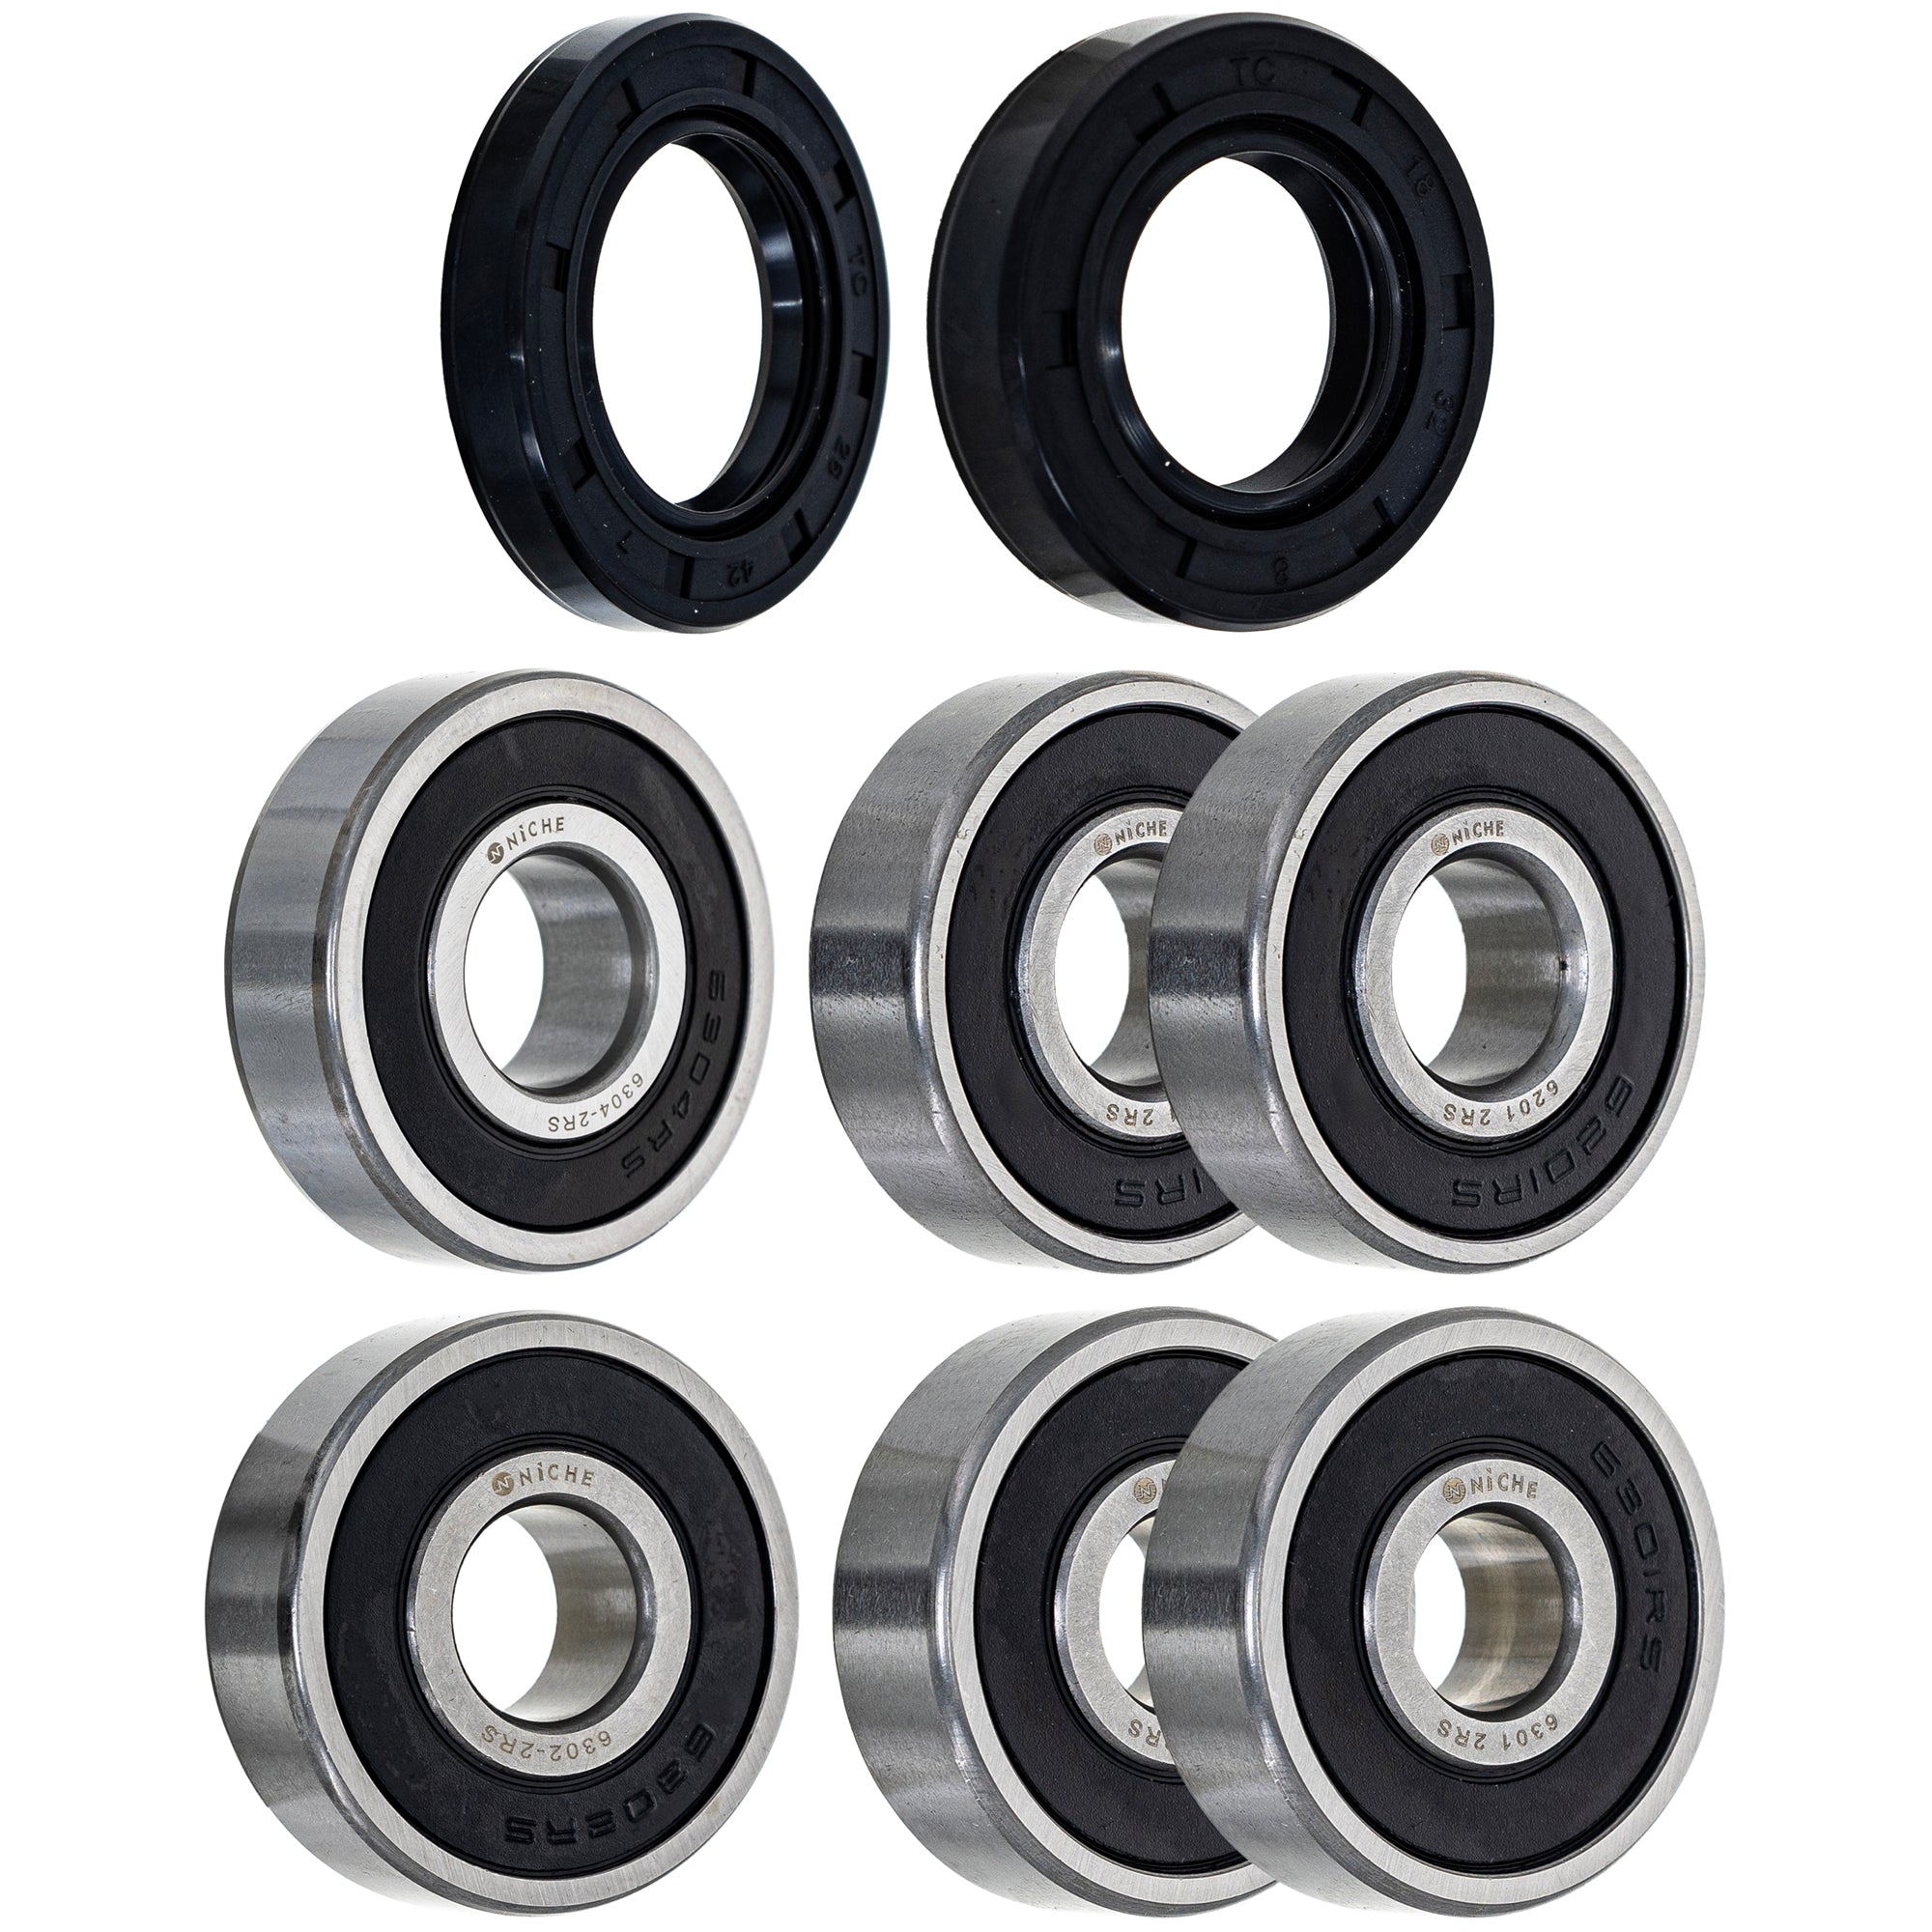 Wheel Bearing Seal Kit for zOTHER TS250 DS250 NICHE MK1008684